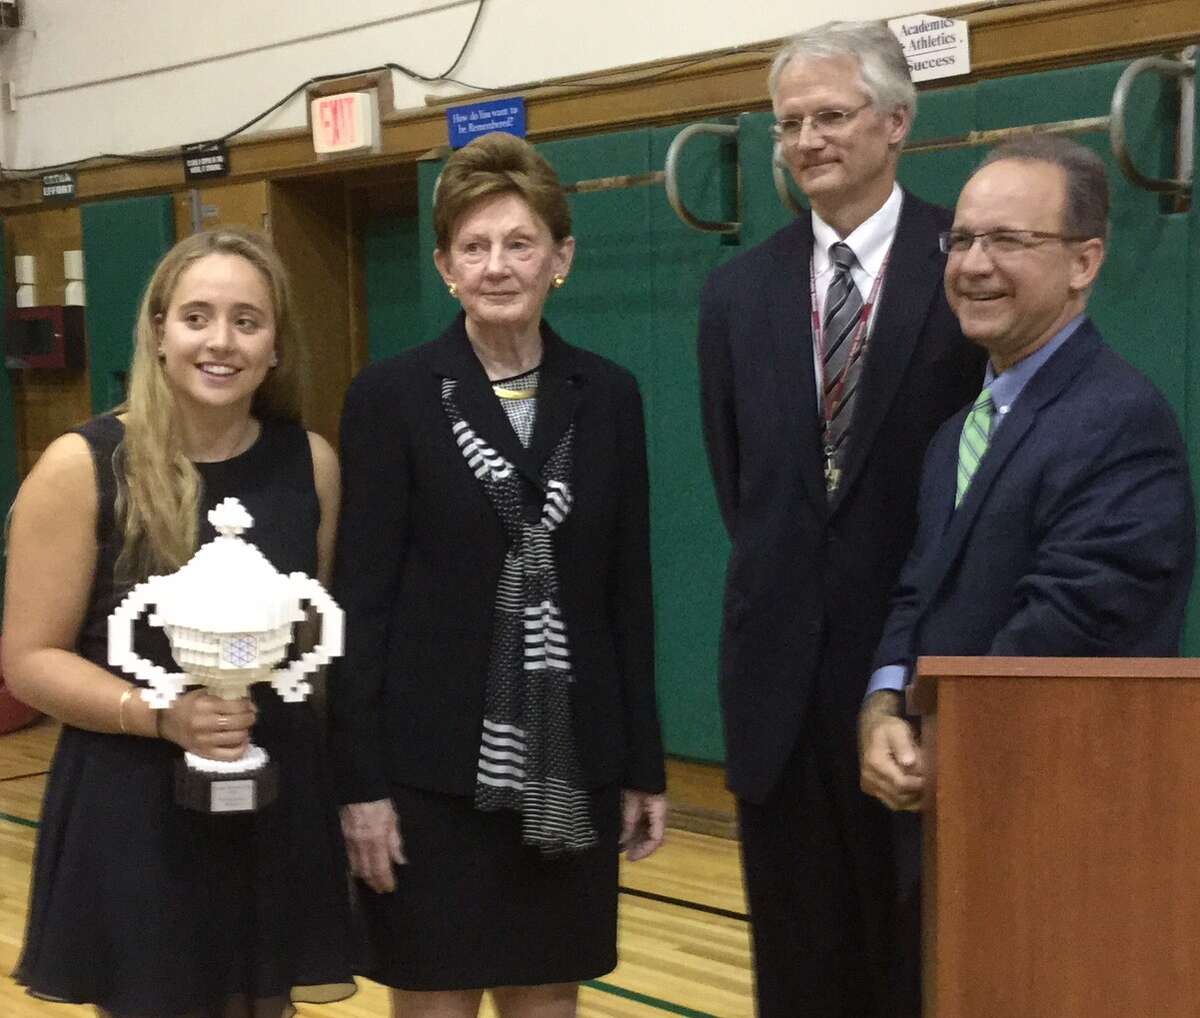 Greenwich High School junior Olivia Hallisey, left, with her Google Science Fair Grand Prize trophy, at the Board of Education’s meeting Thursday at Julian Curtiss School. Joining Hallisey at the podium were, from left, Board of Education Chairman Barbara O’Neill; Superintendent of Schools William McKersie; and Andrew Bramante, Hallisey’s honors science research teacher.